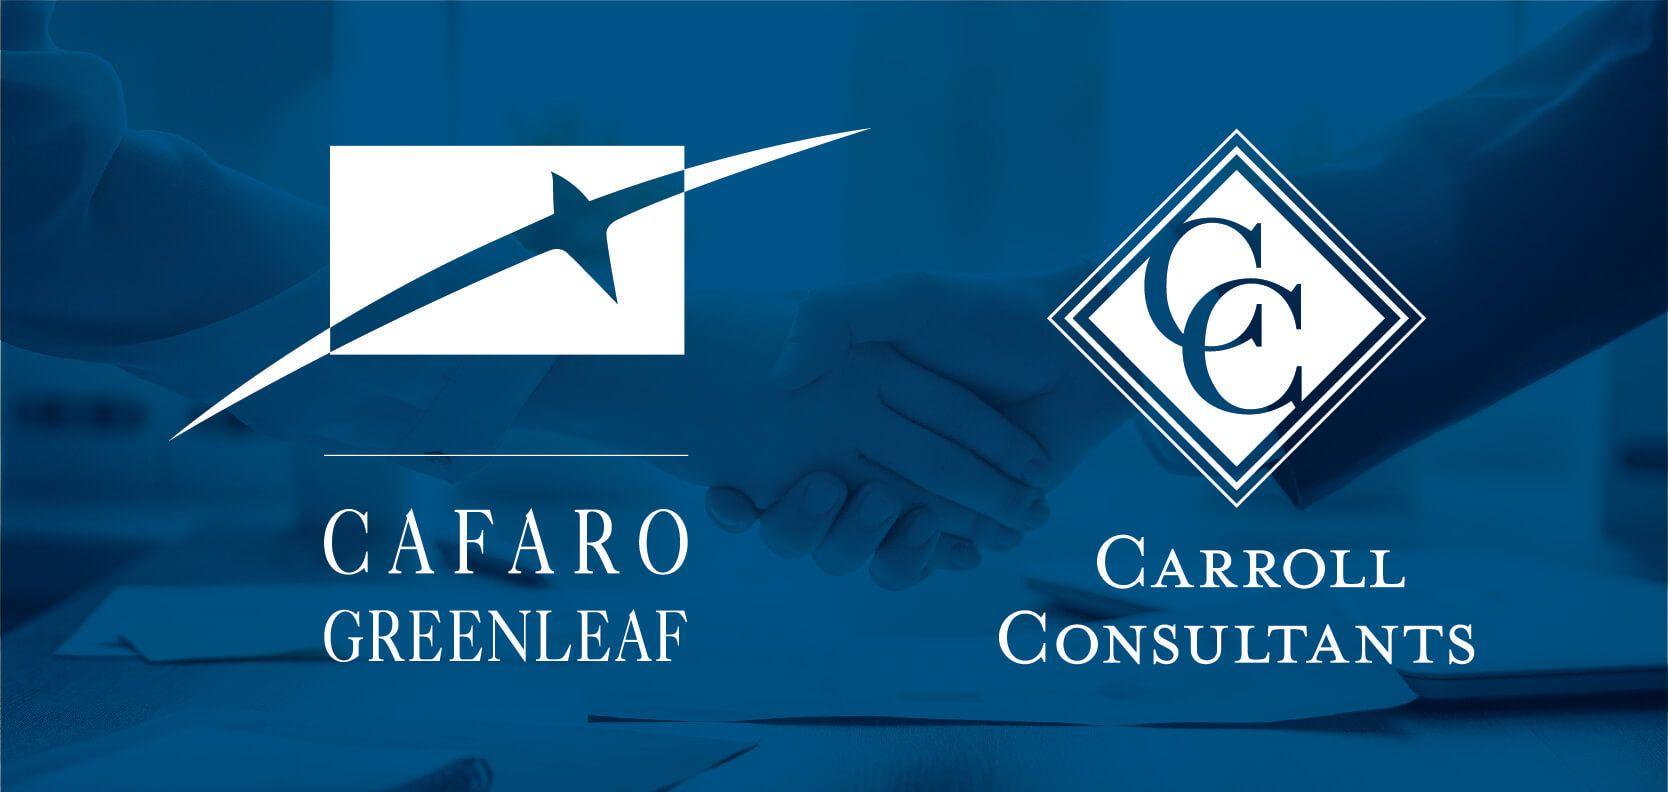 Blue and Green Leaf Logo - Cafaro Greenleaf Expands Footprint with Merger of Carroll ...